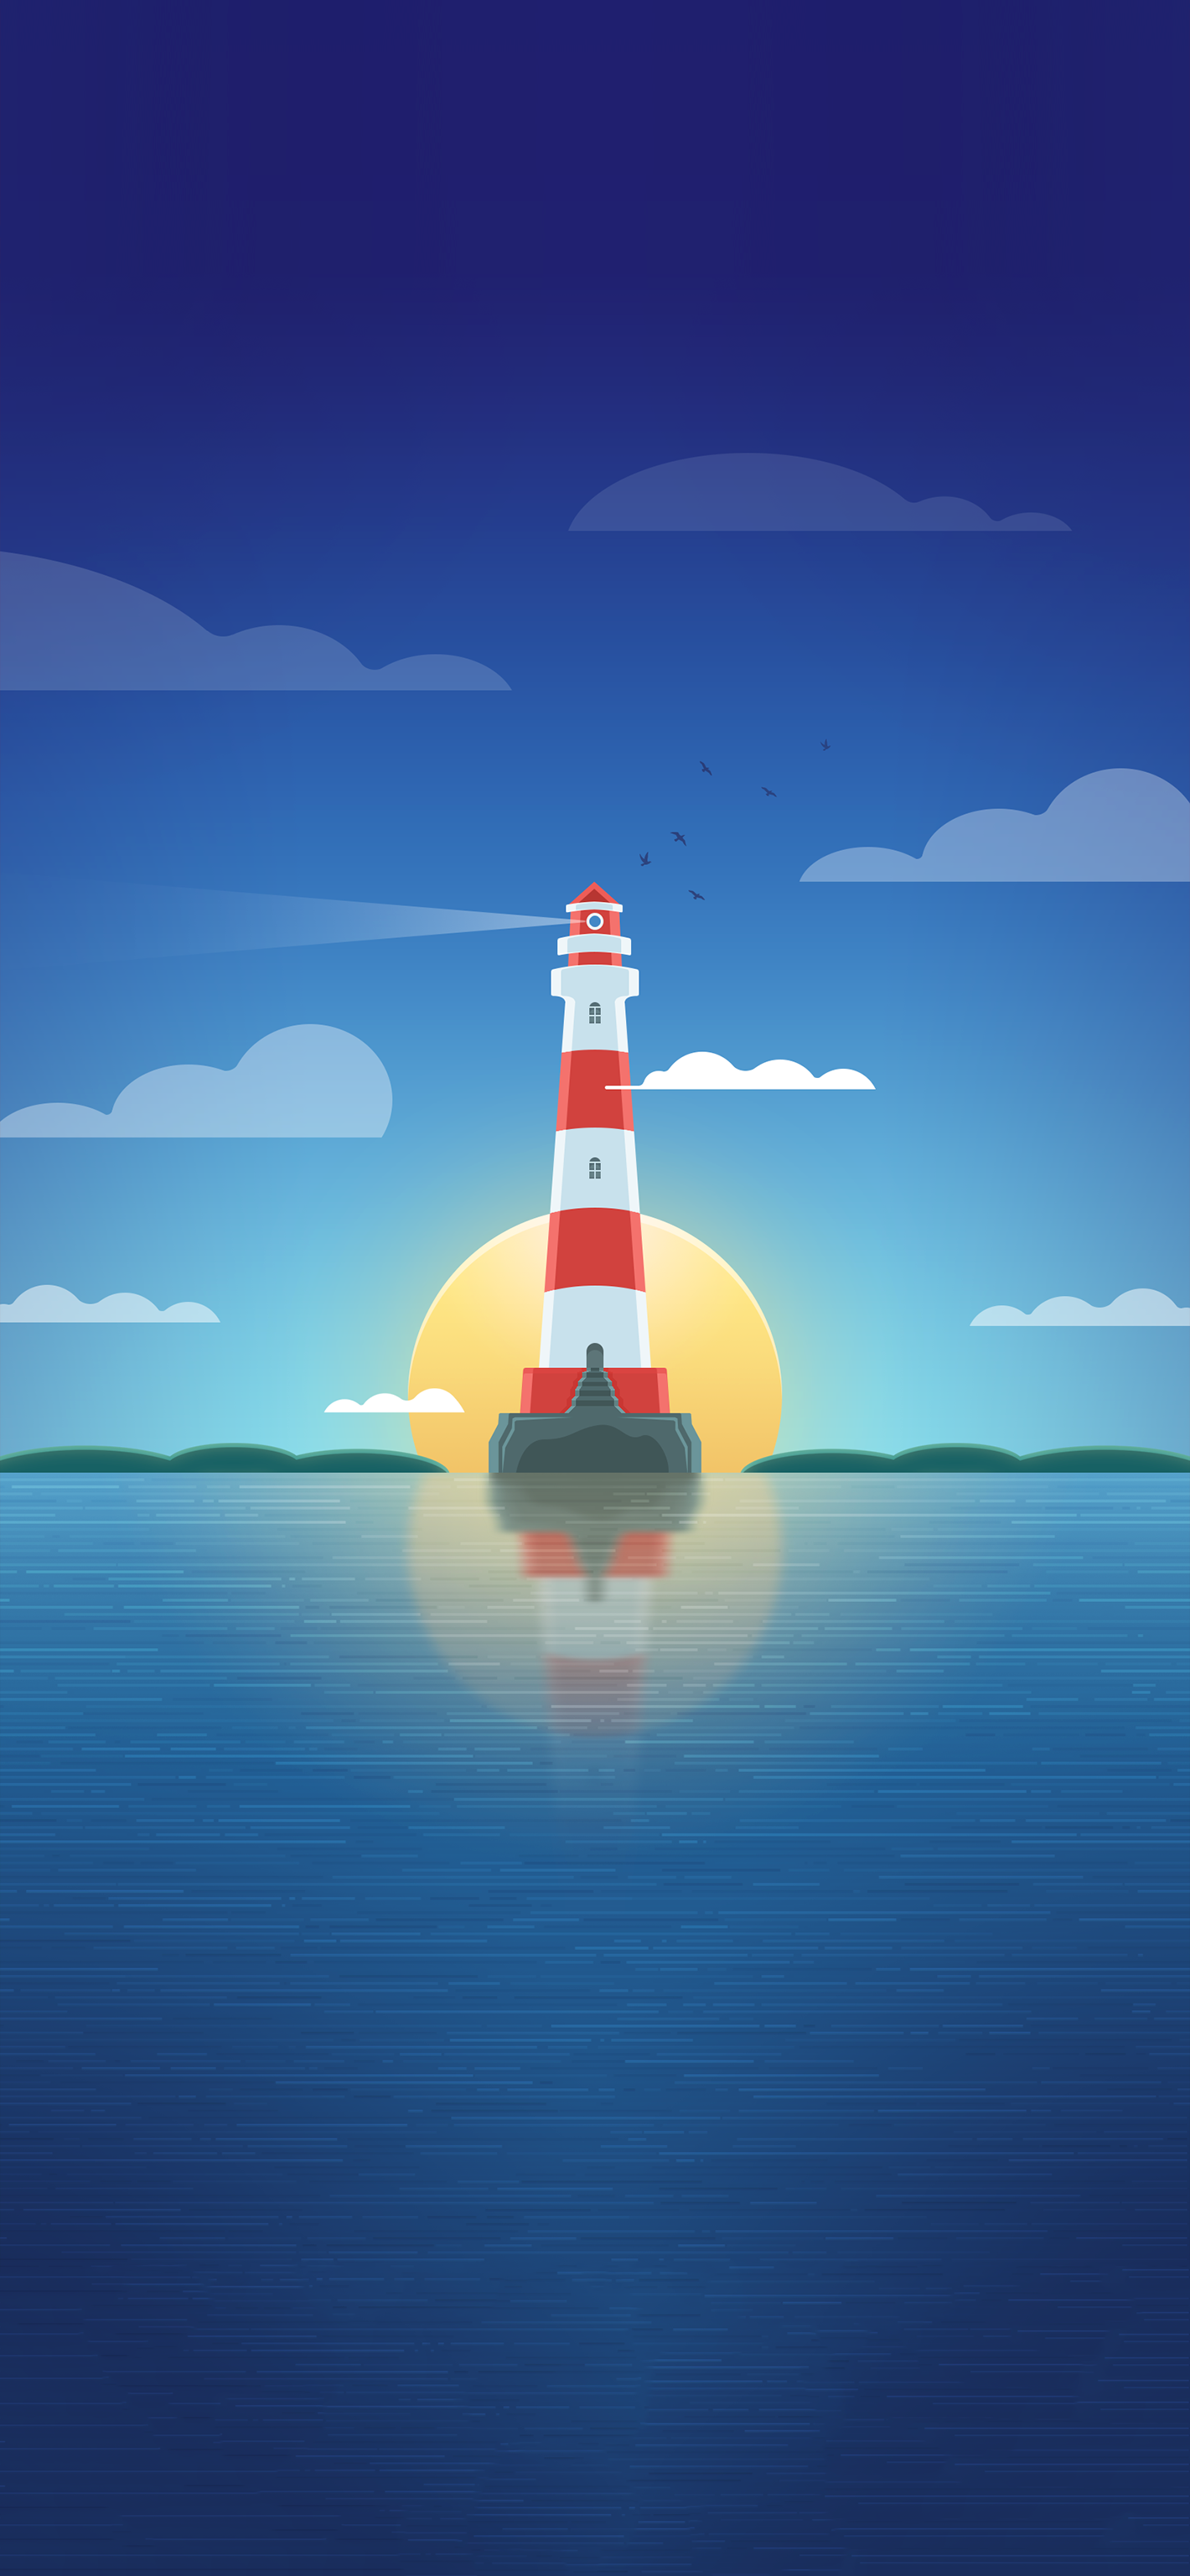 220+ Lighthouse wallpapers HD | Download Free backgrounds